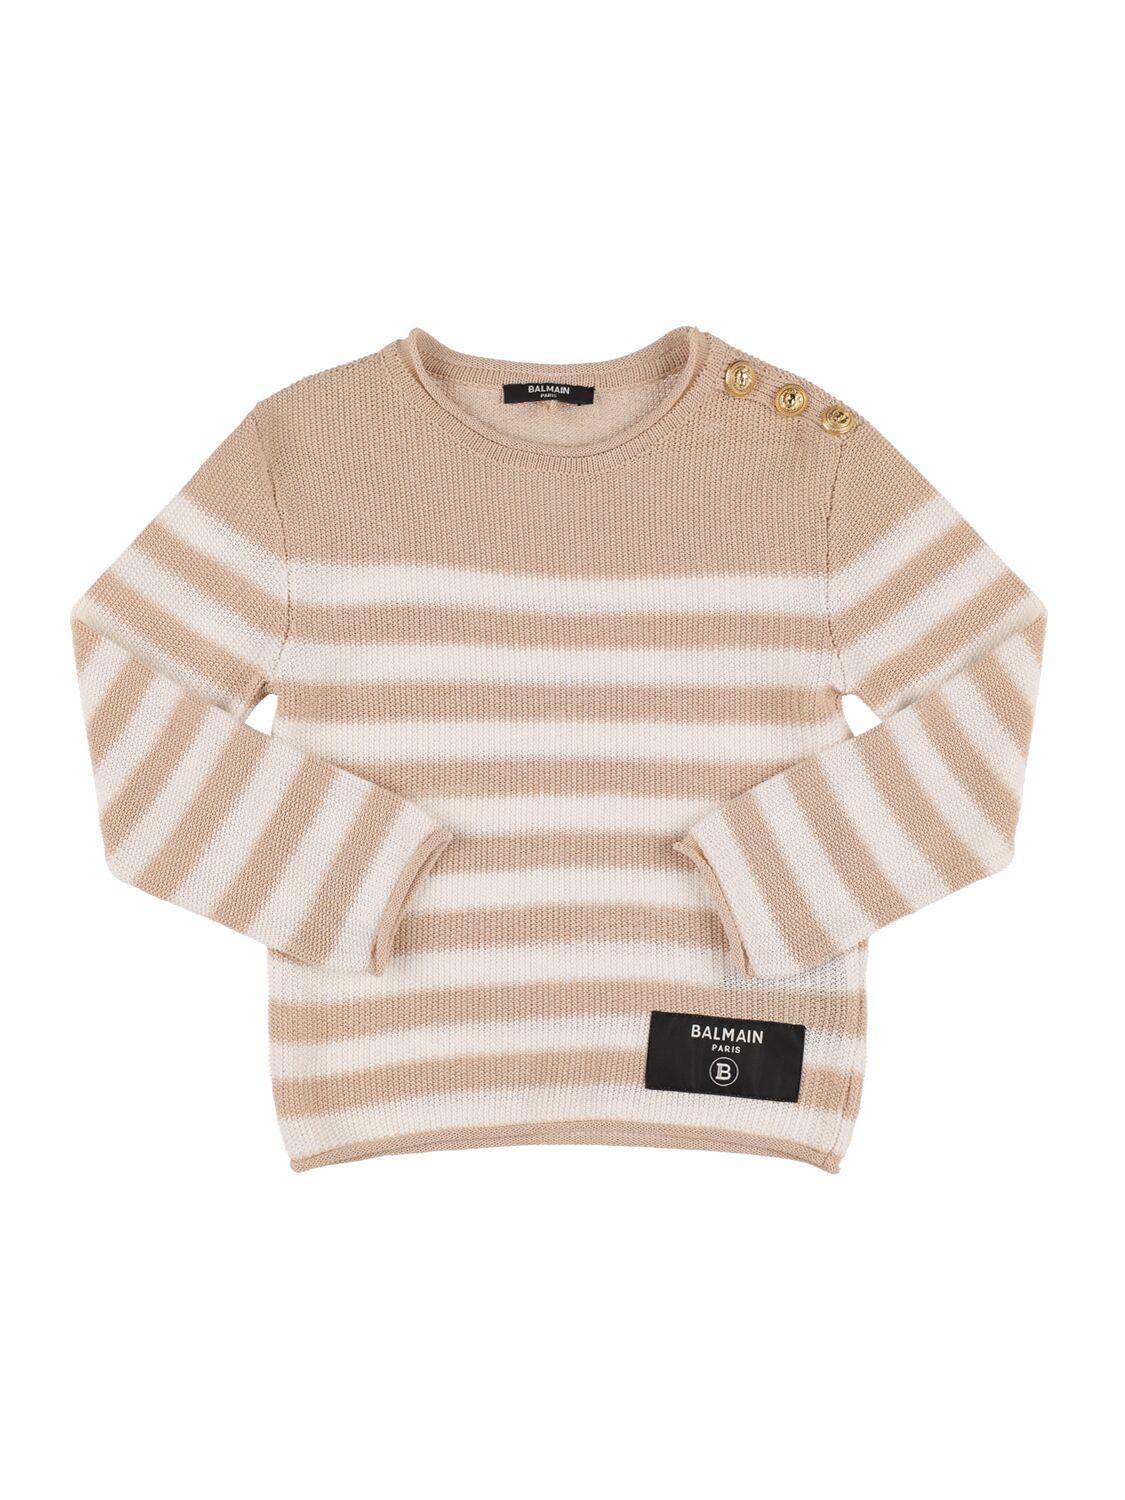 Image of Stiped Knit Cotton Sweater